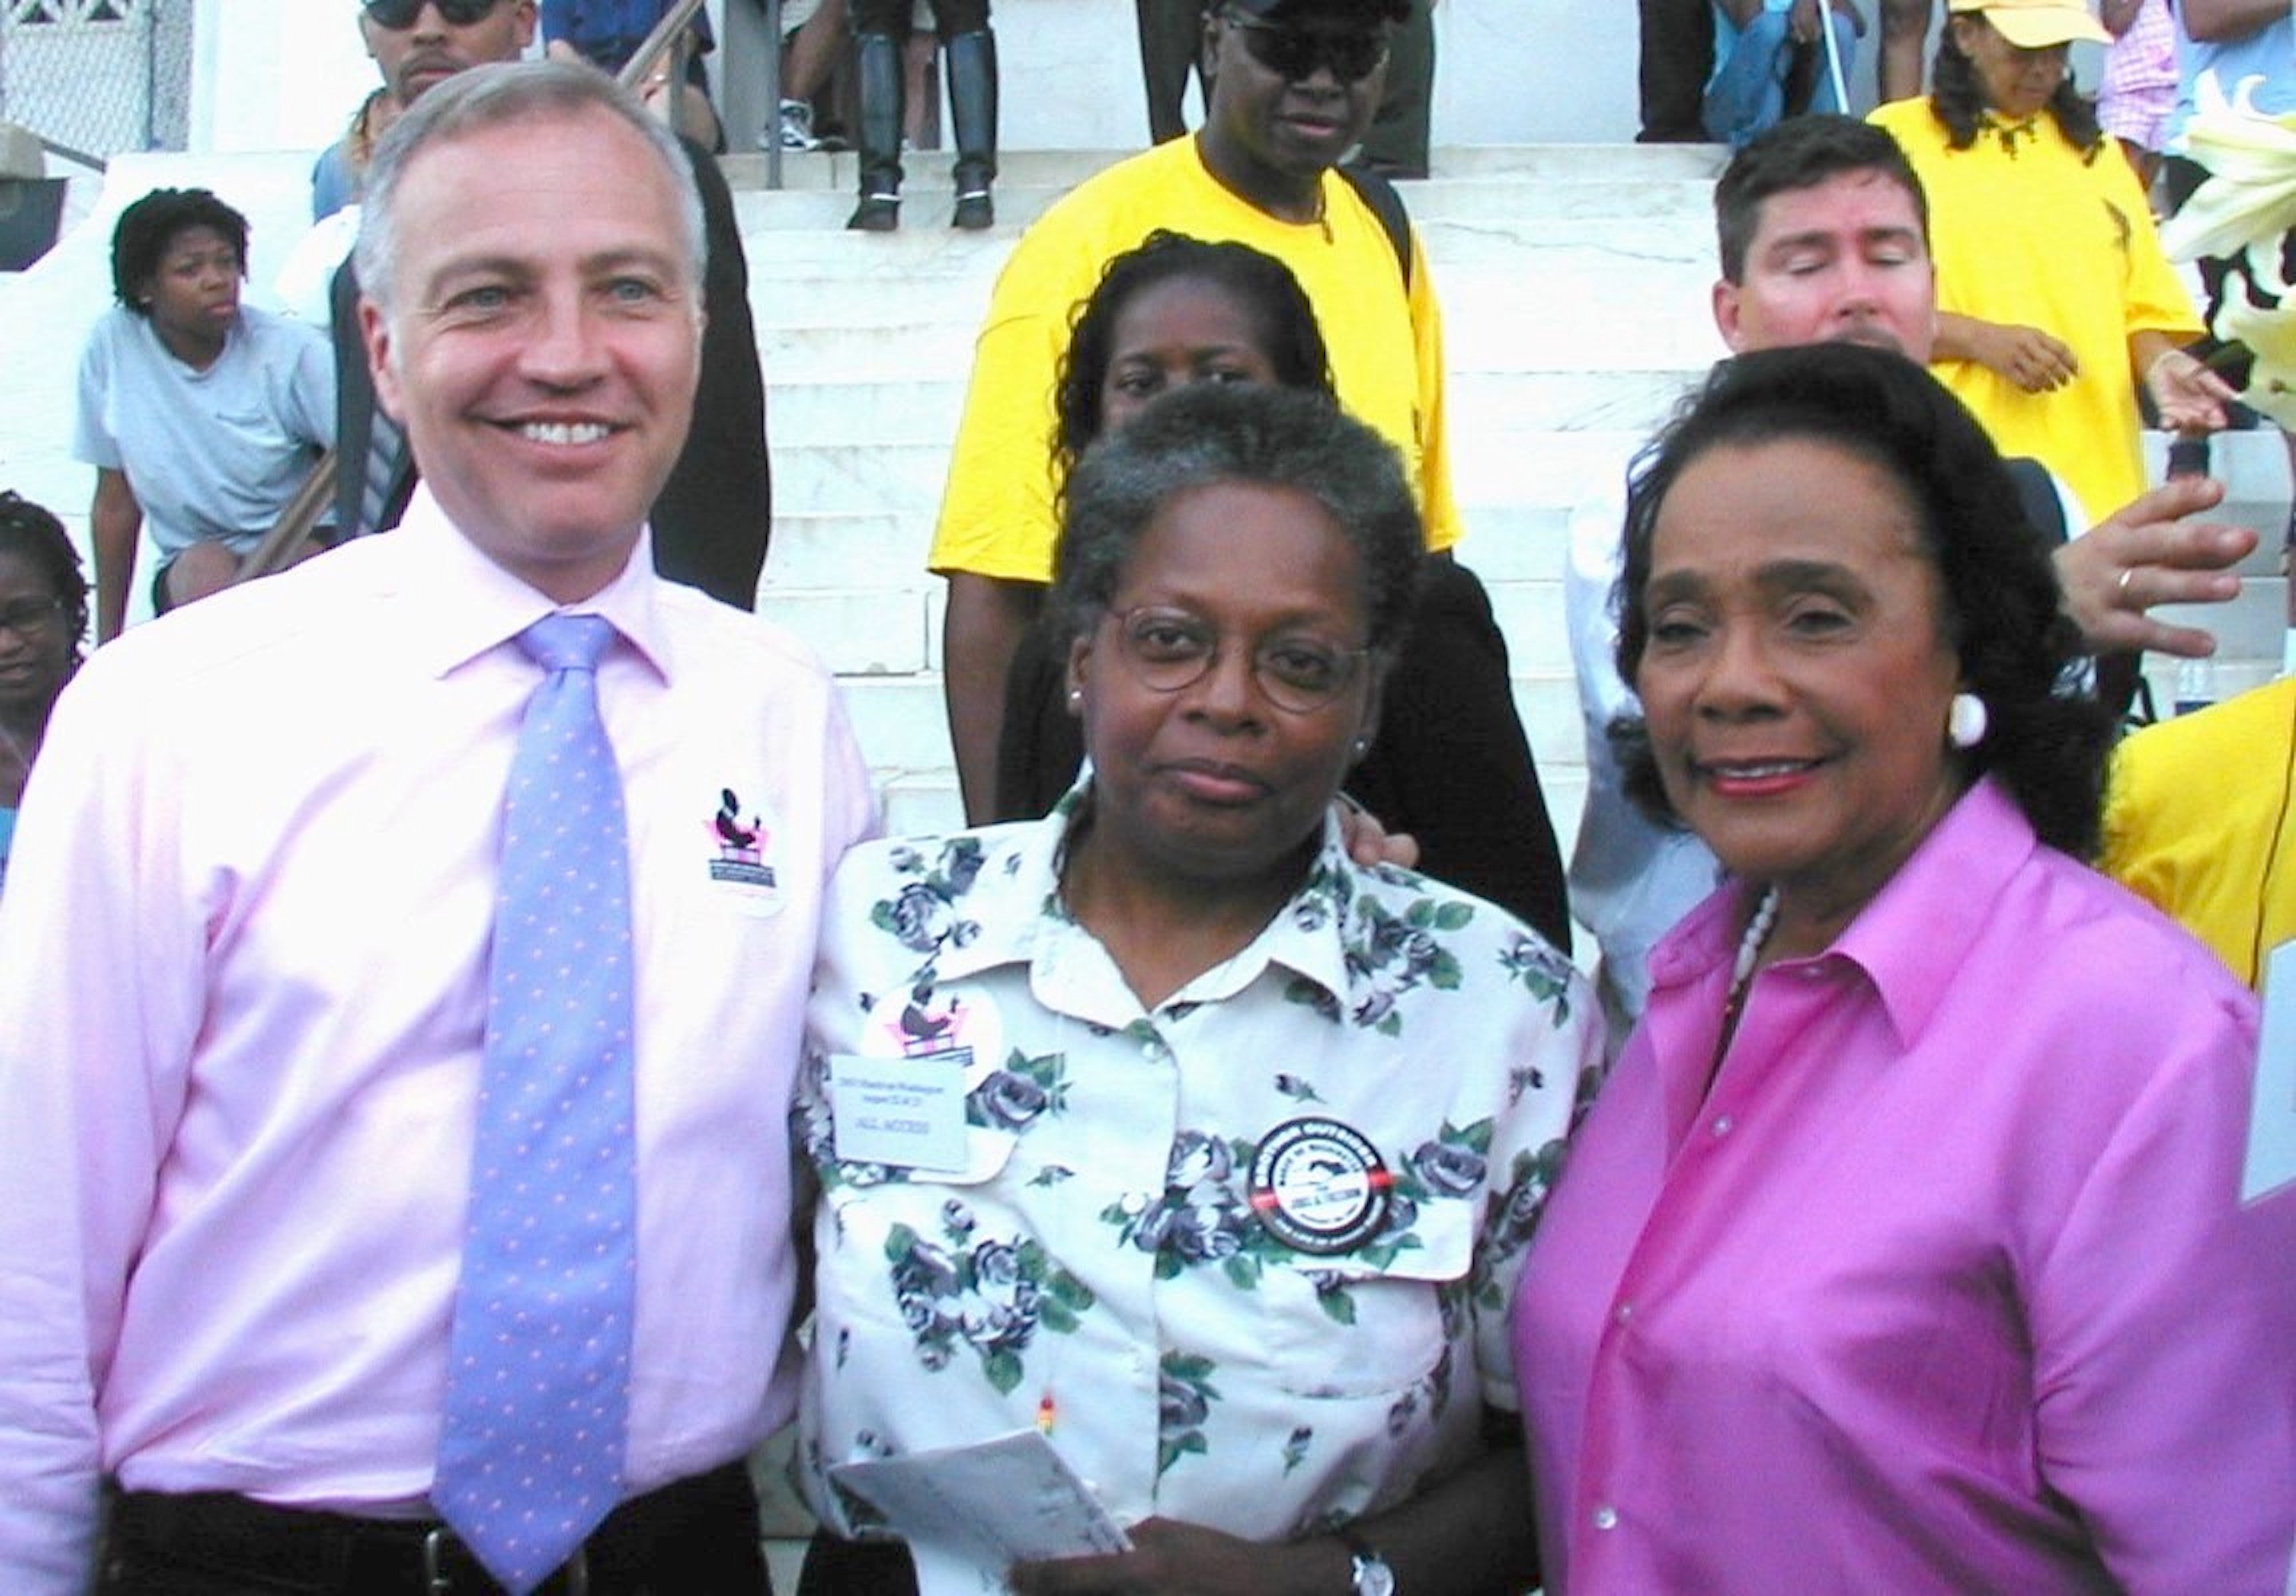 (L-R): Matt Foreman of the National Gay and Lesbian Task Force (NGLTF), Mandy Carter, and Mrs. Coretta Scott King at the 40th Anniversary of the March on Washington for Gay and Lesbian Rights, December 2003, Washington, DC. Mandy shares, “We both got to speak representing Southerners on New Ground (SONG) and NGLTF at the request of Martin Luther King III.”  Photo courtesy of Mandy Carter.